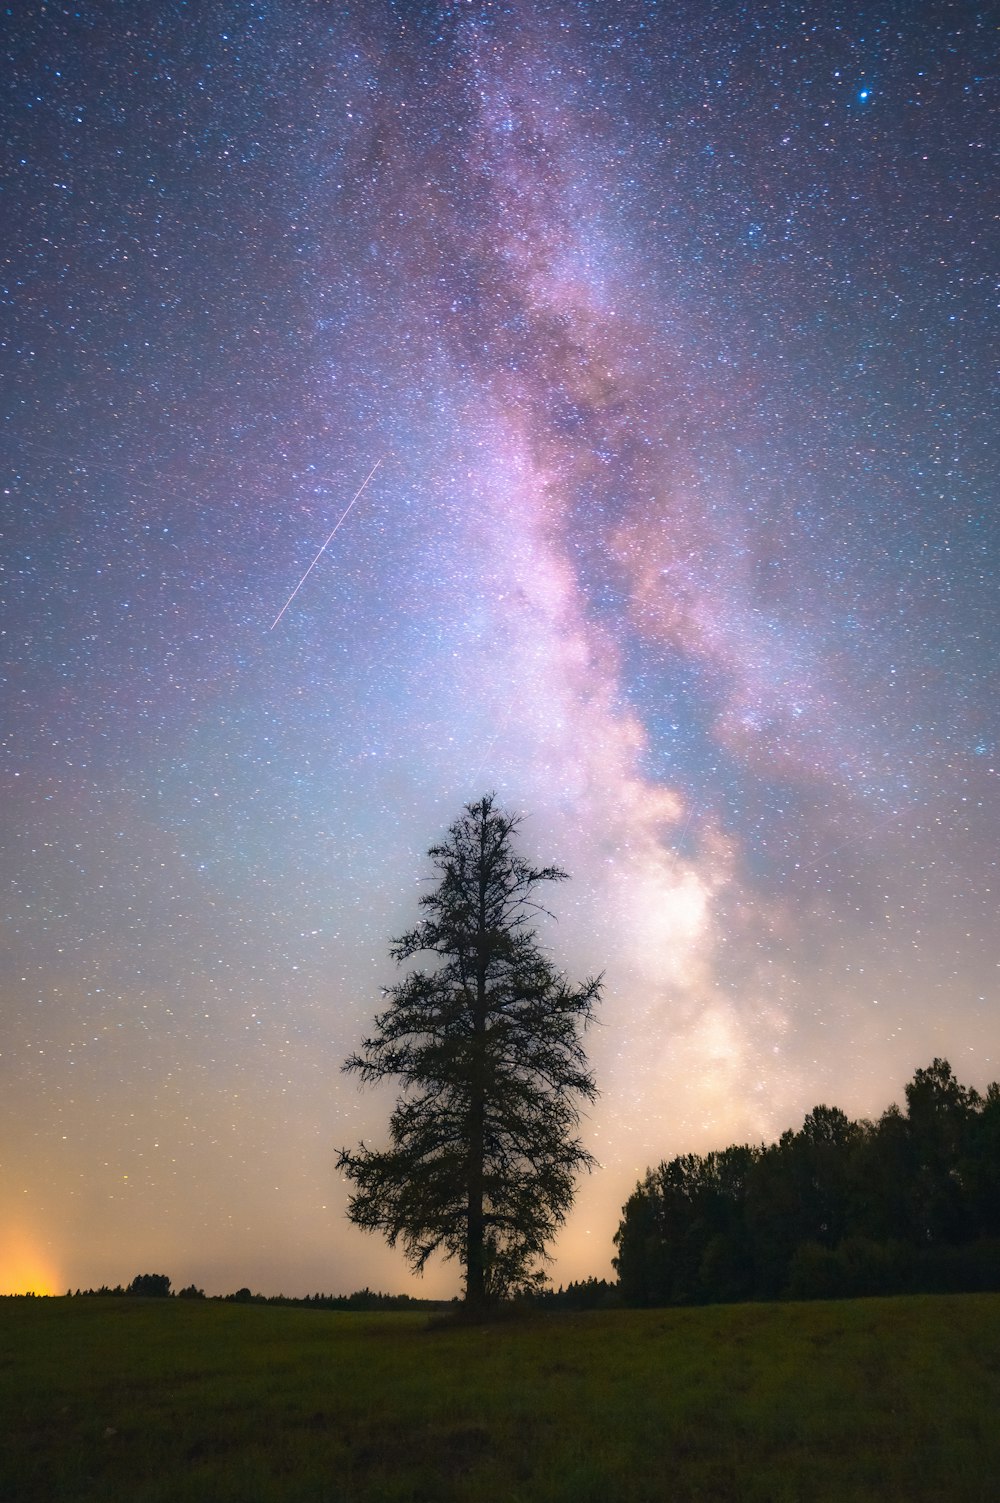 a tree in a field under a night sky filled with stars